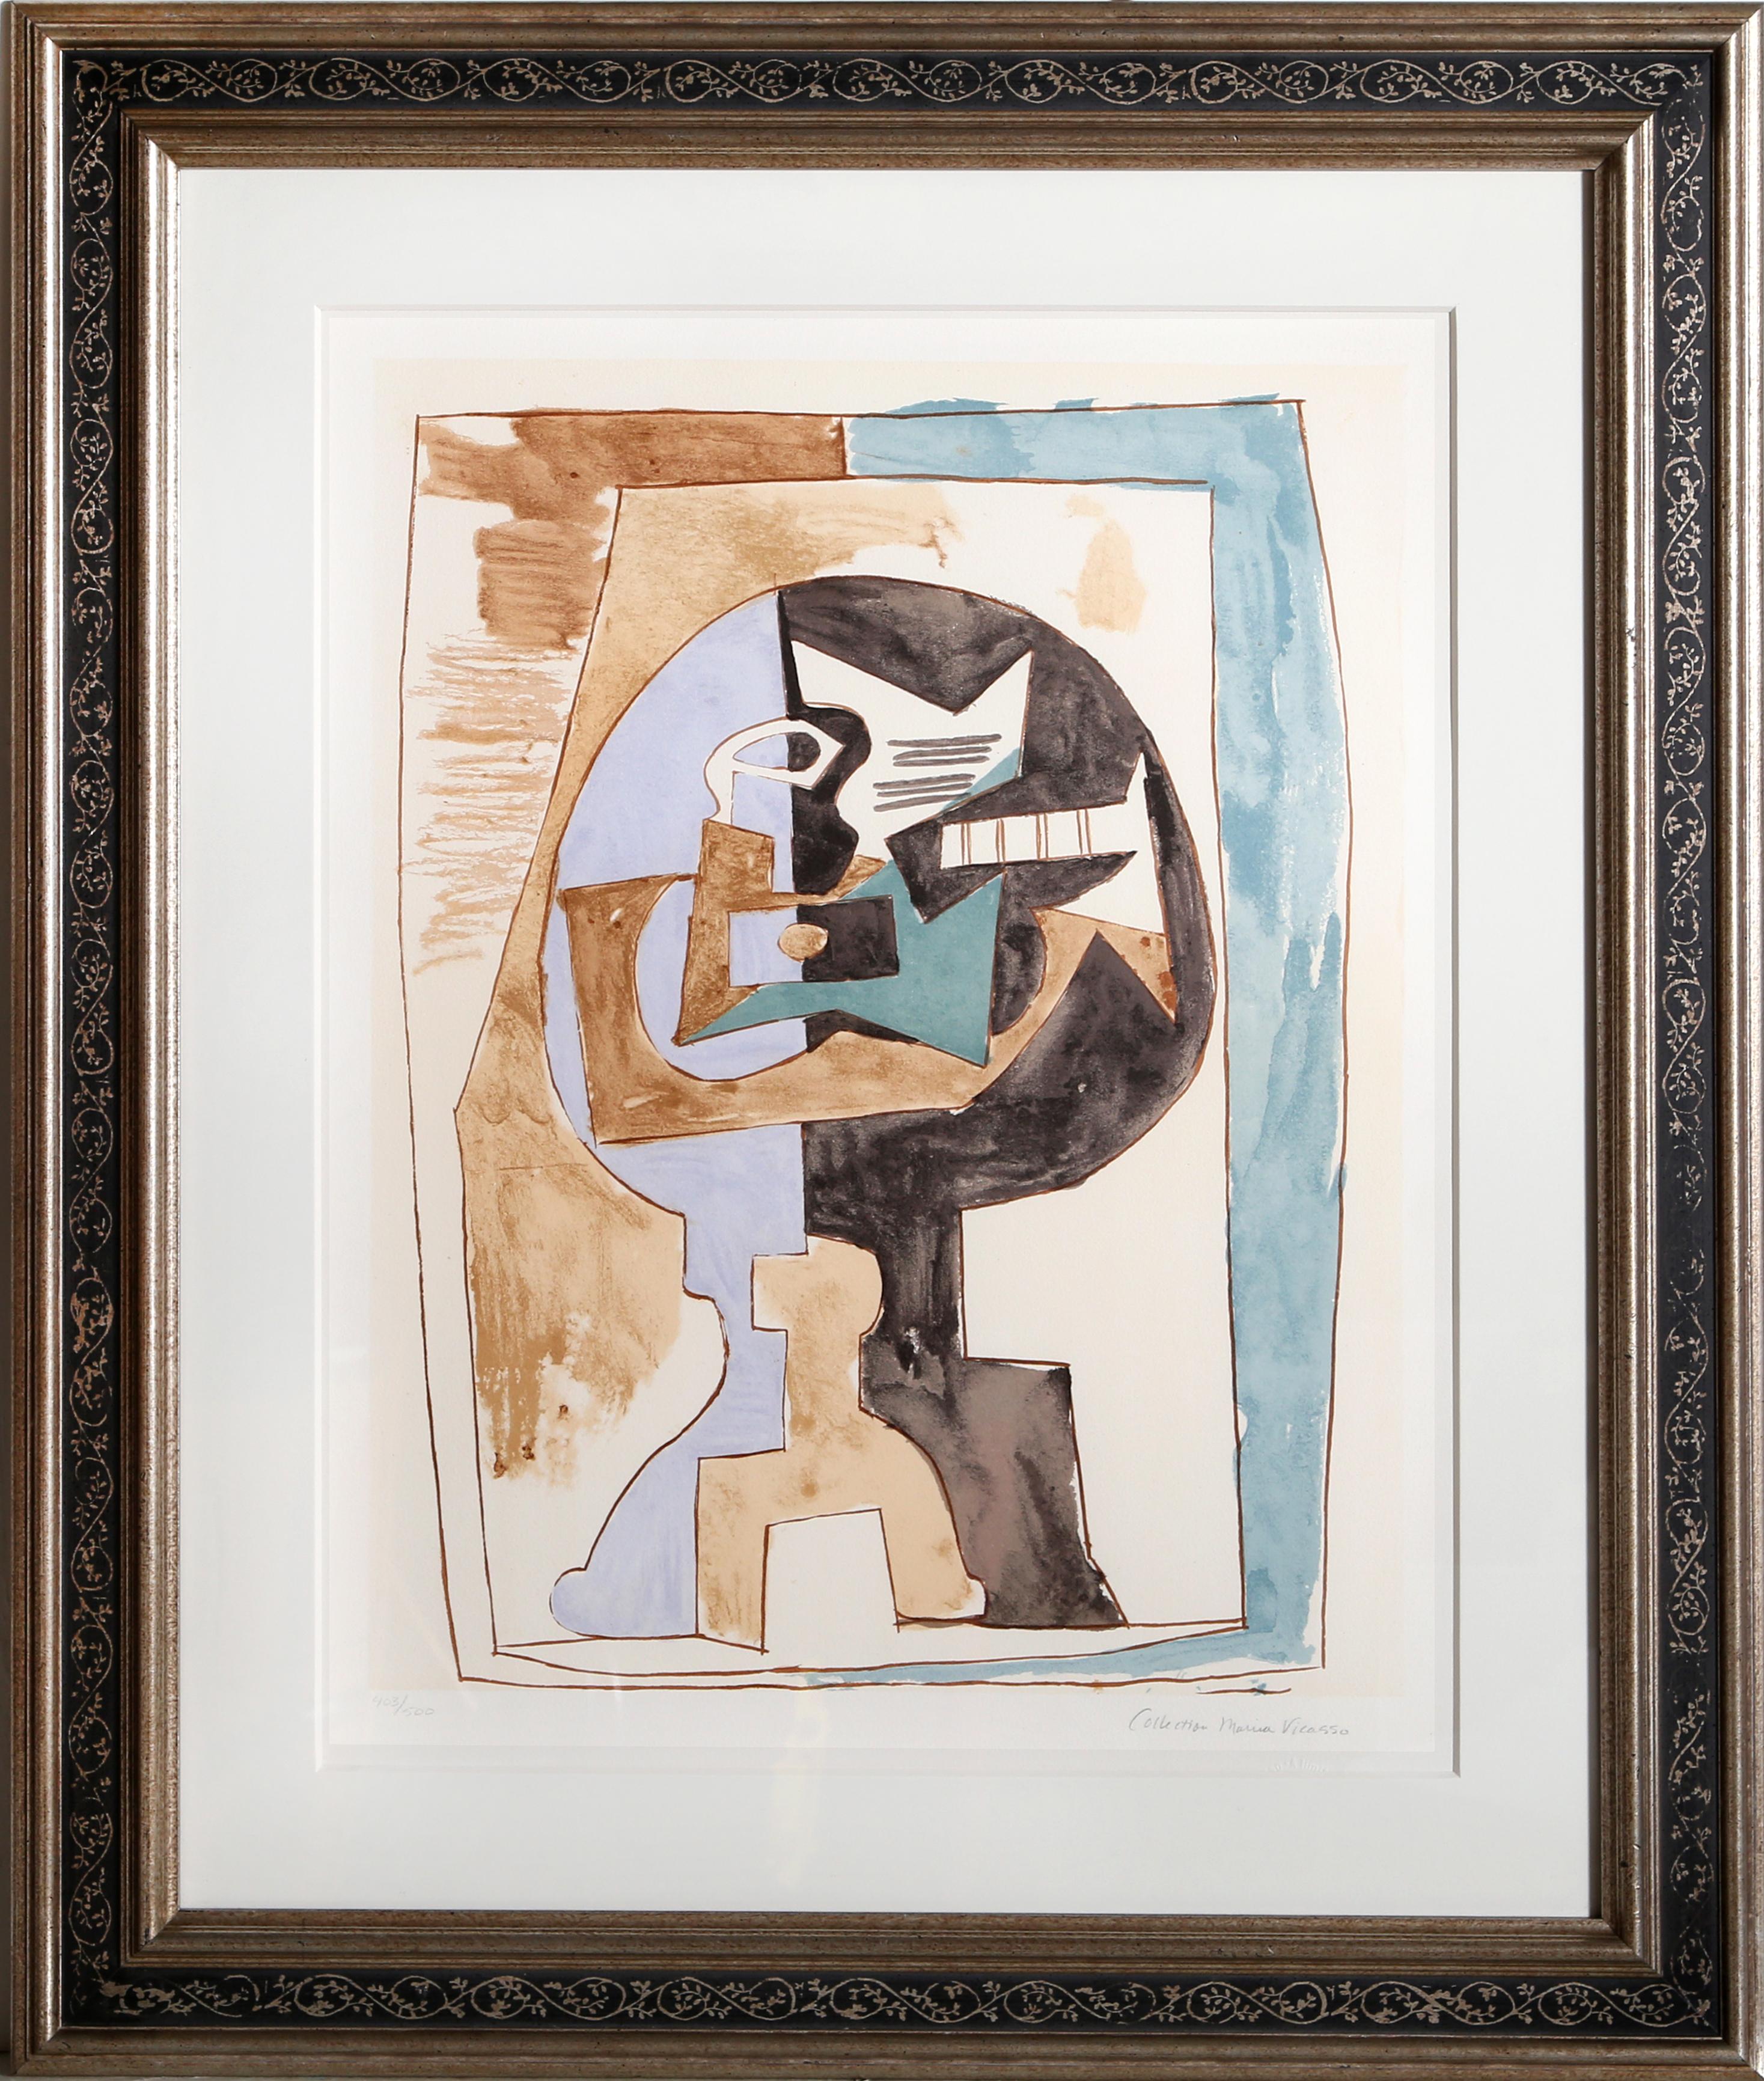 A lithograph from the Marina Picasso Estate Collection after the Pablo Picasso painting "Guéridon et Guitare". The original painting was completed in 1920. In the 1970's after Picasso's death, Marina Picasso, his granddaughter, authorized the